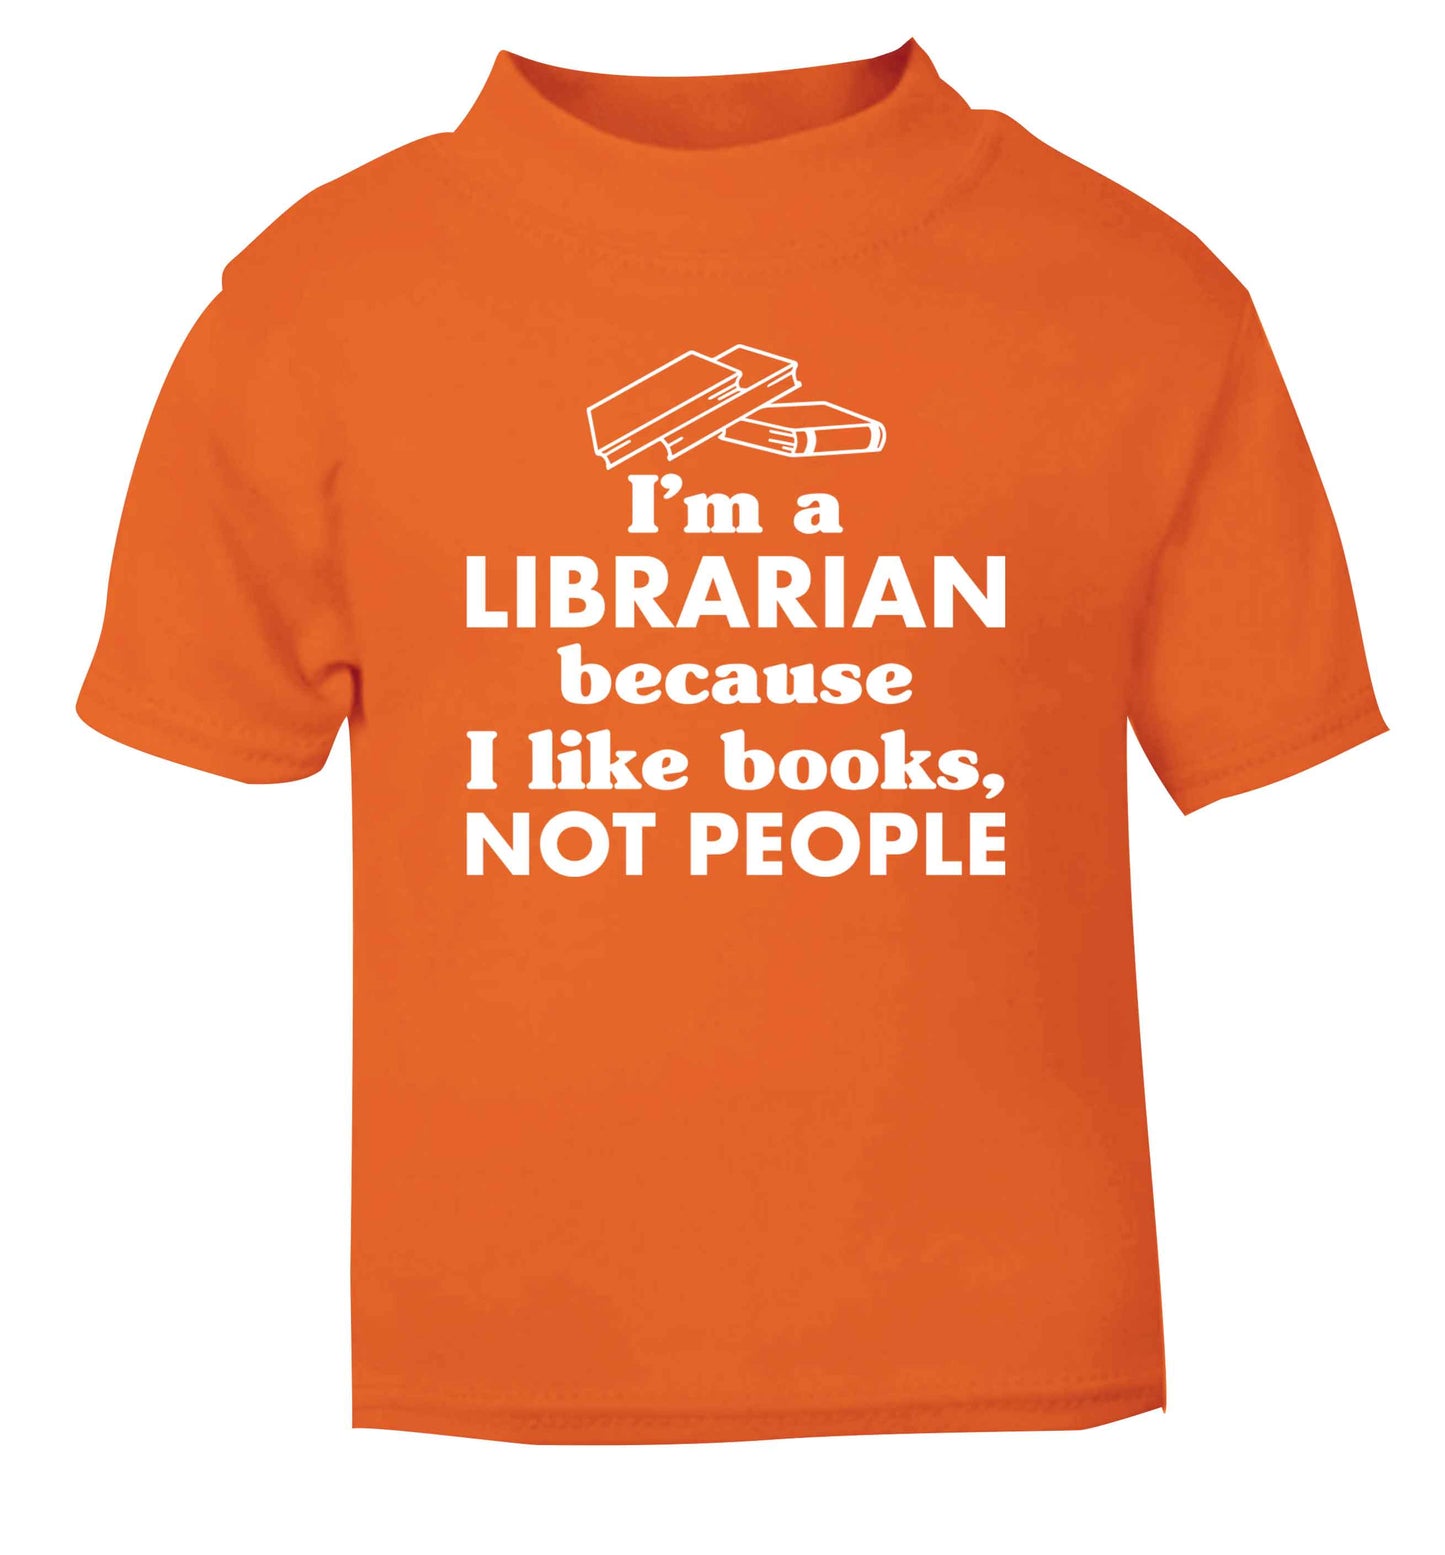 I'm a librarian because I like books not people orange Baby Toddler Tshirt 2 Years